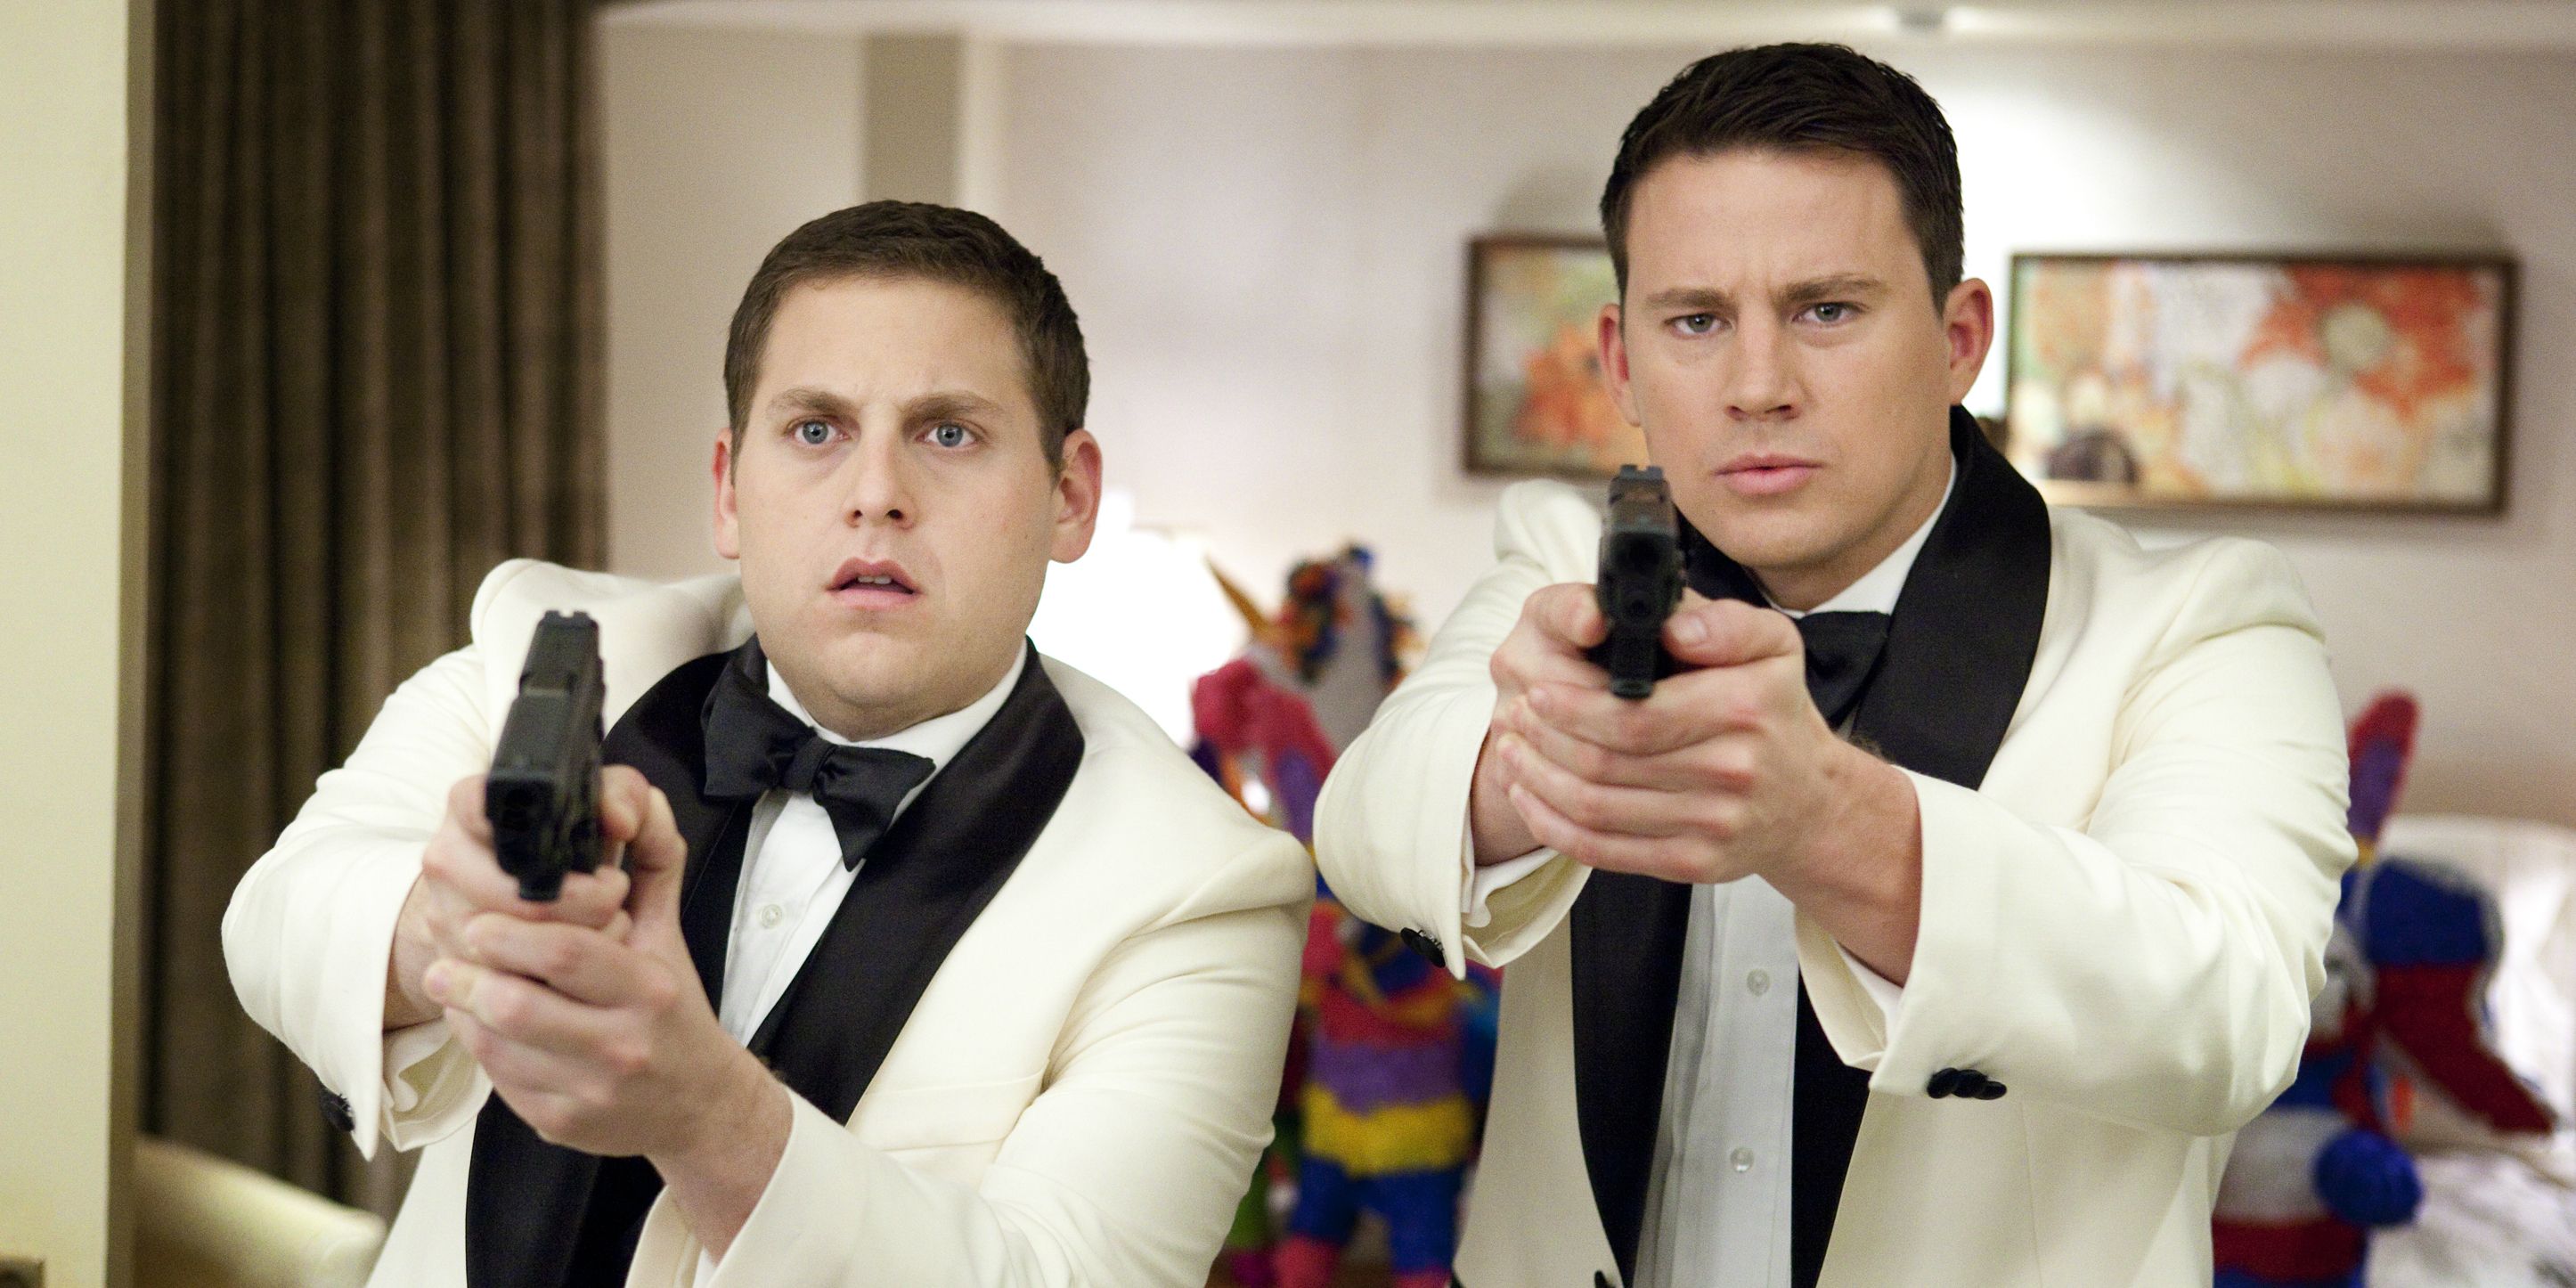 23 Jump Street: 5 Reasons It Should Get Made (& 5 Why It Shouldn’t)